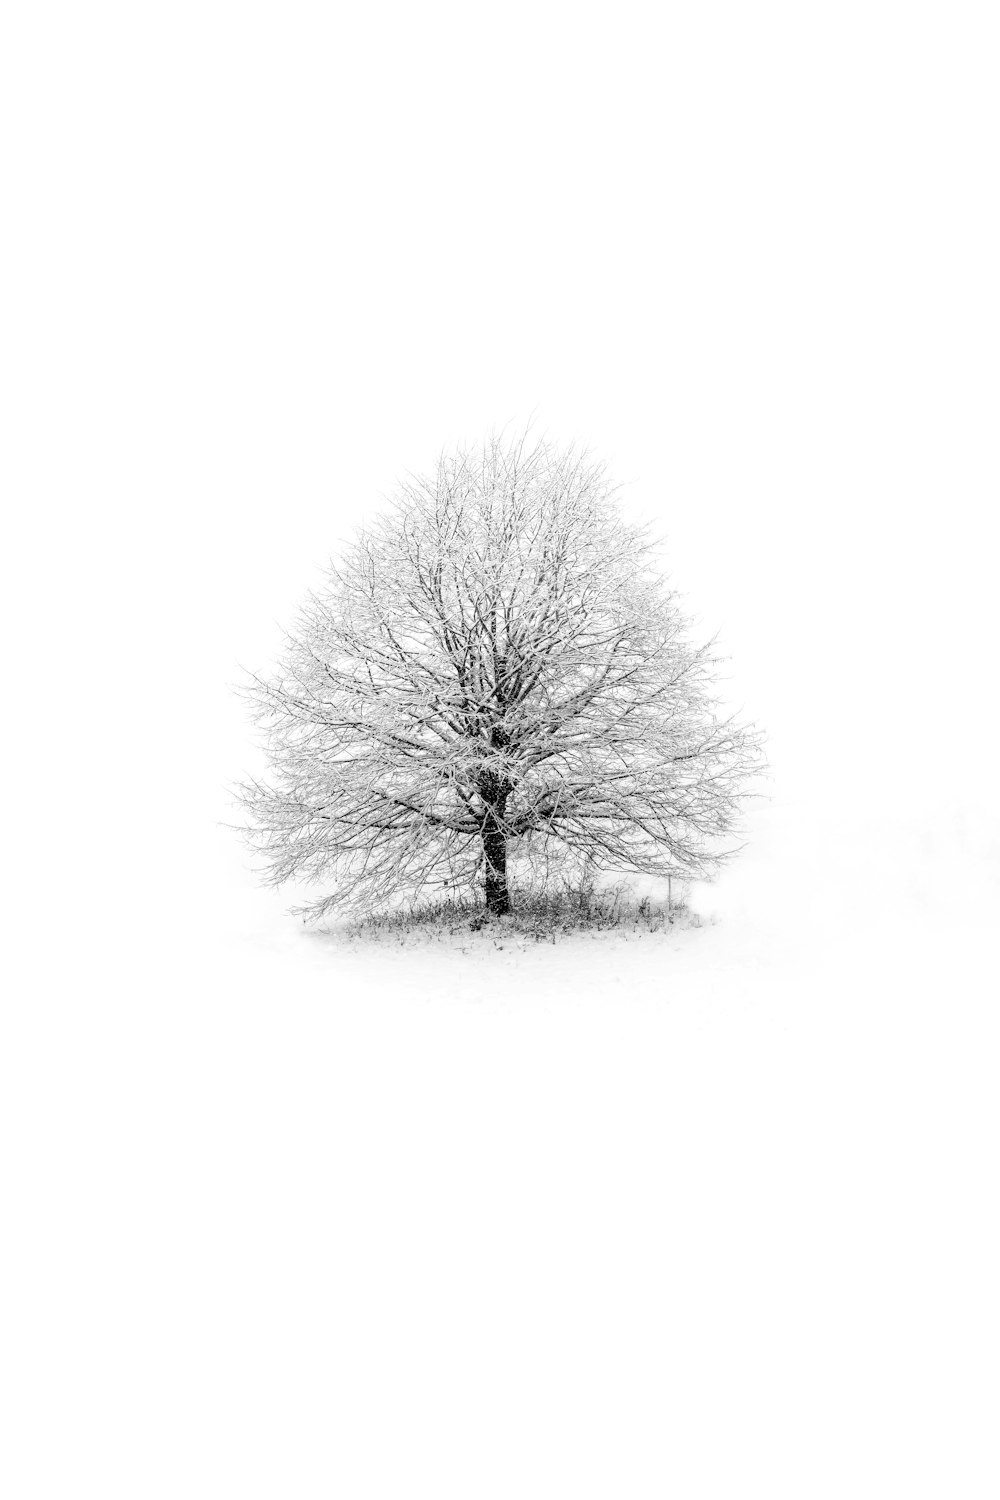 a lone tree stands alone in the snow